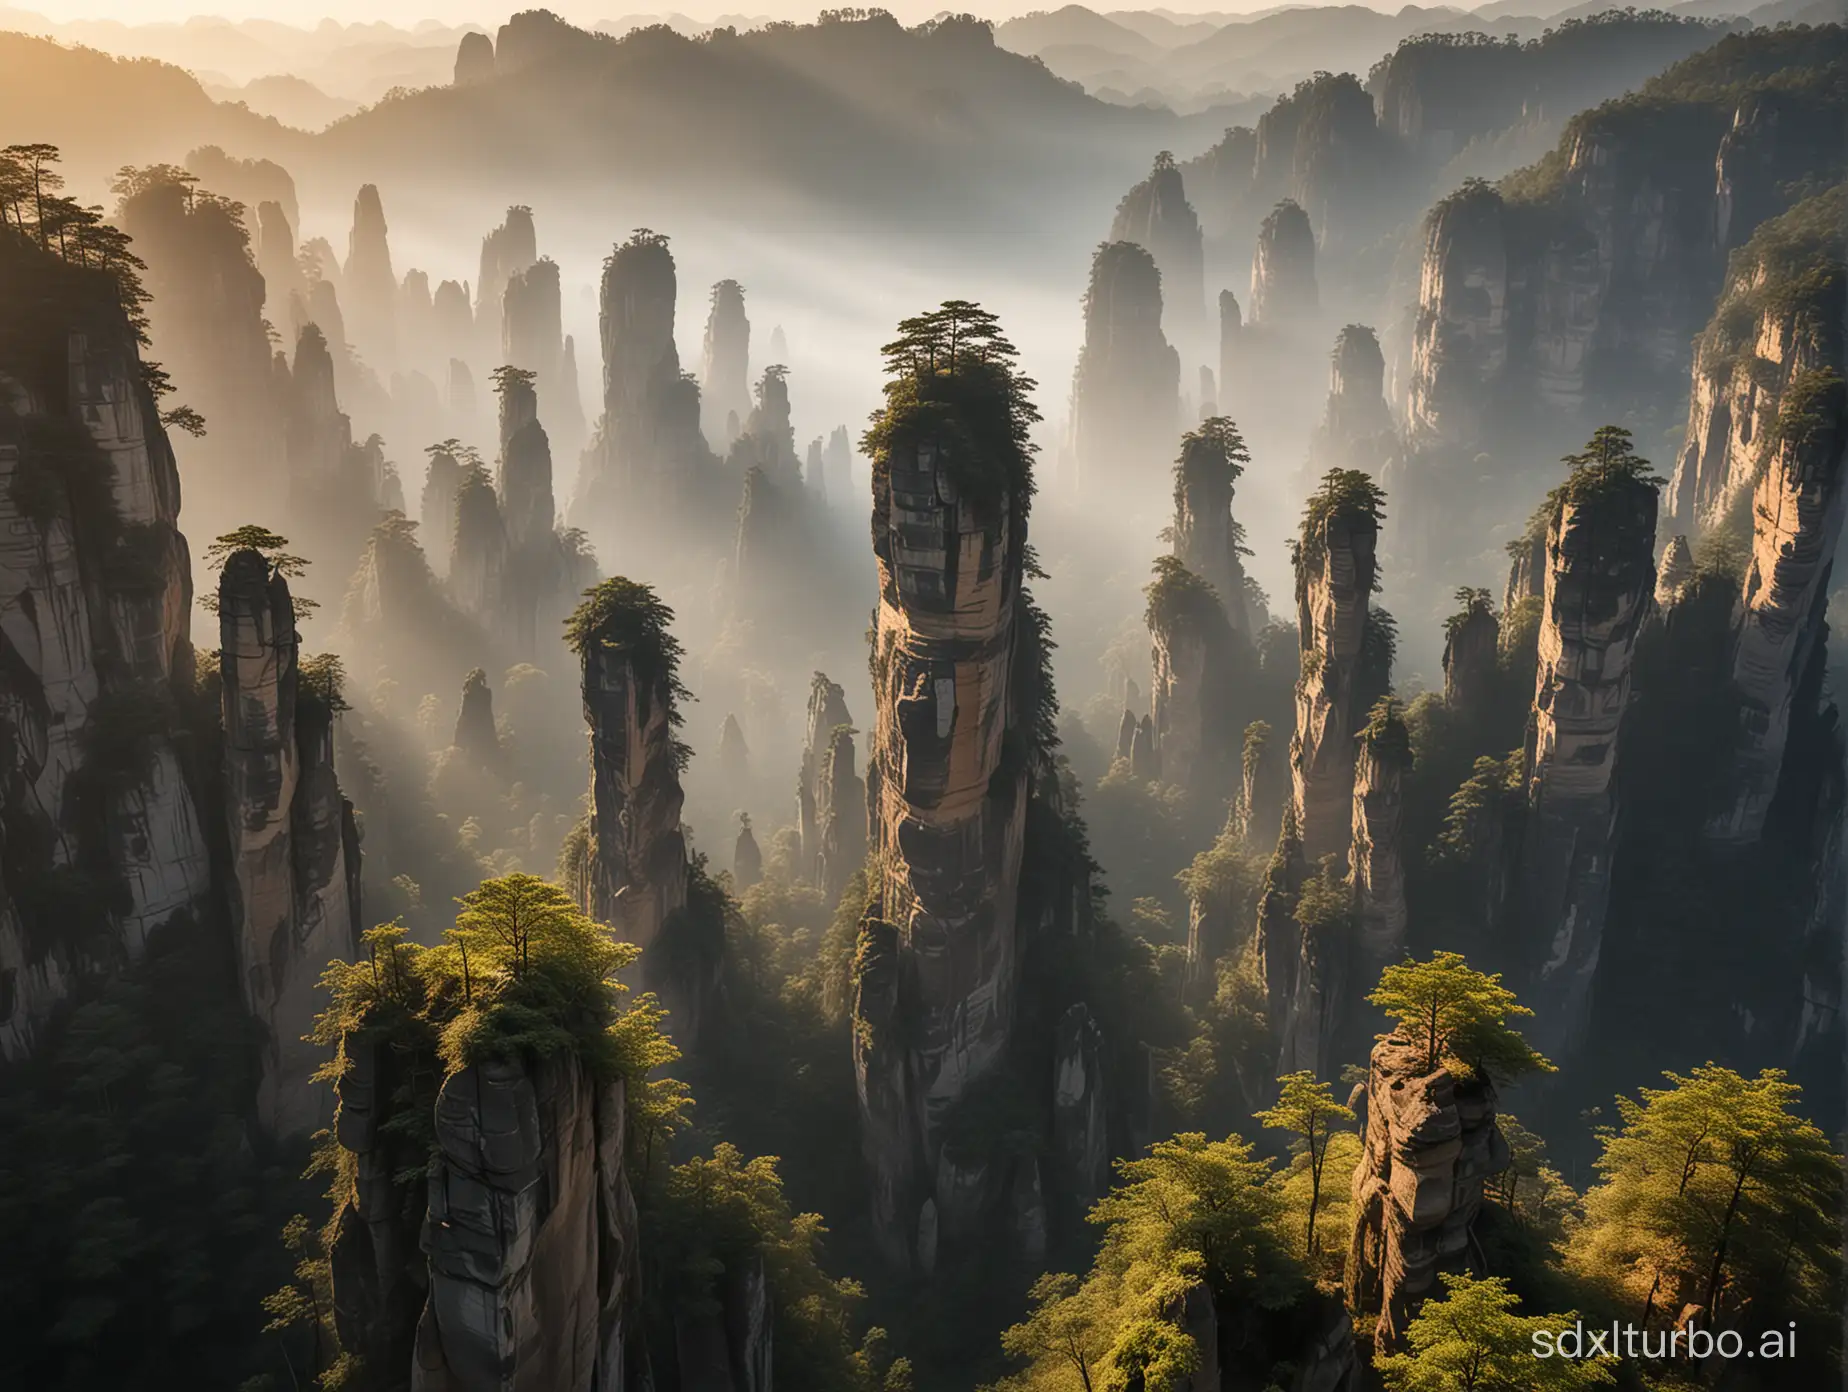 Majestic-Karst-Formations-at-Golden-Hour-Aerial-View-of-Ethereal-Mountain-Landscape